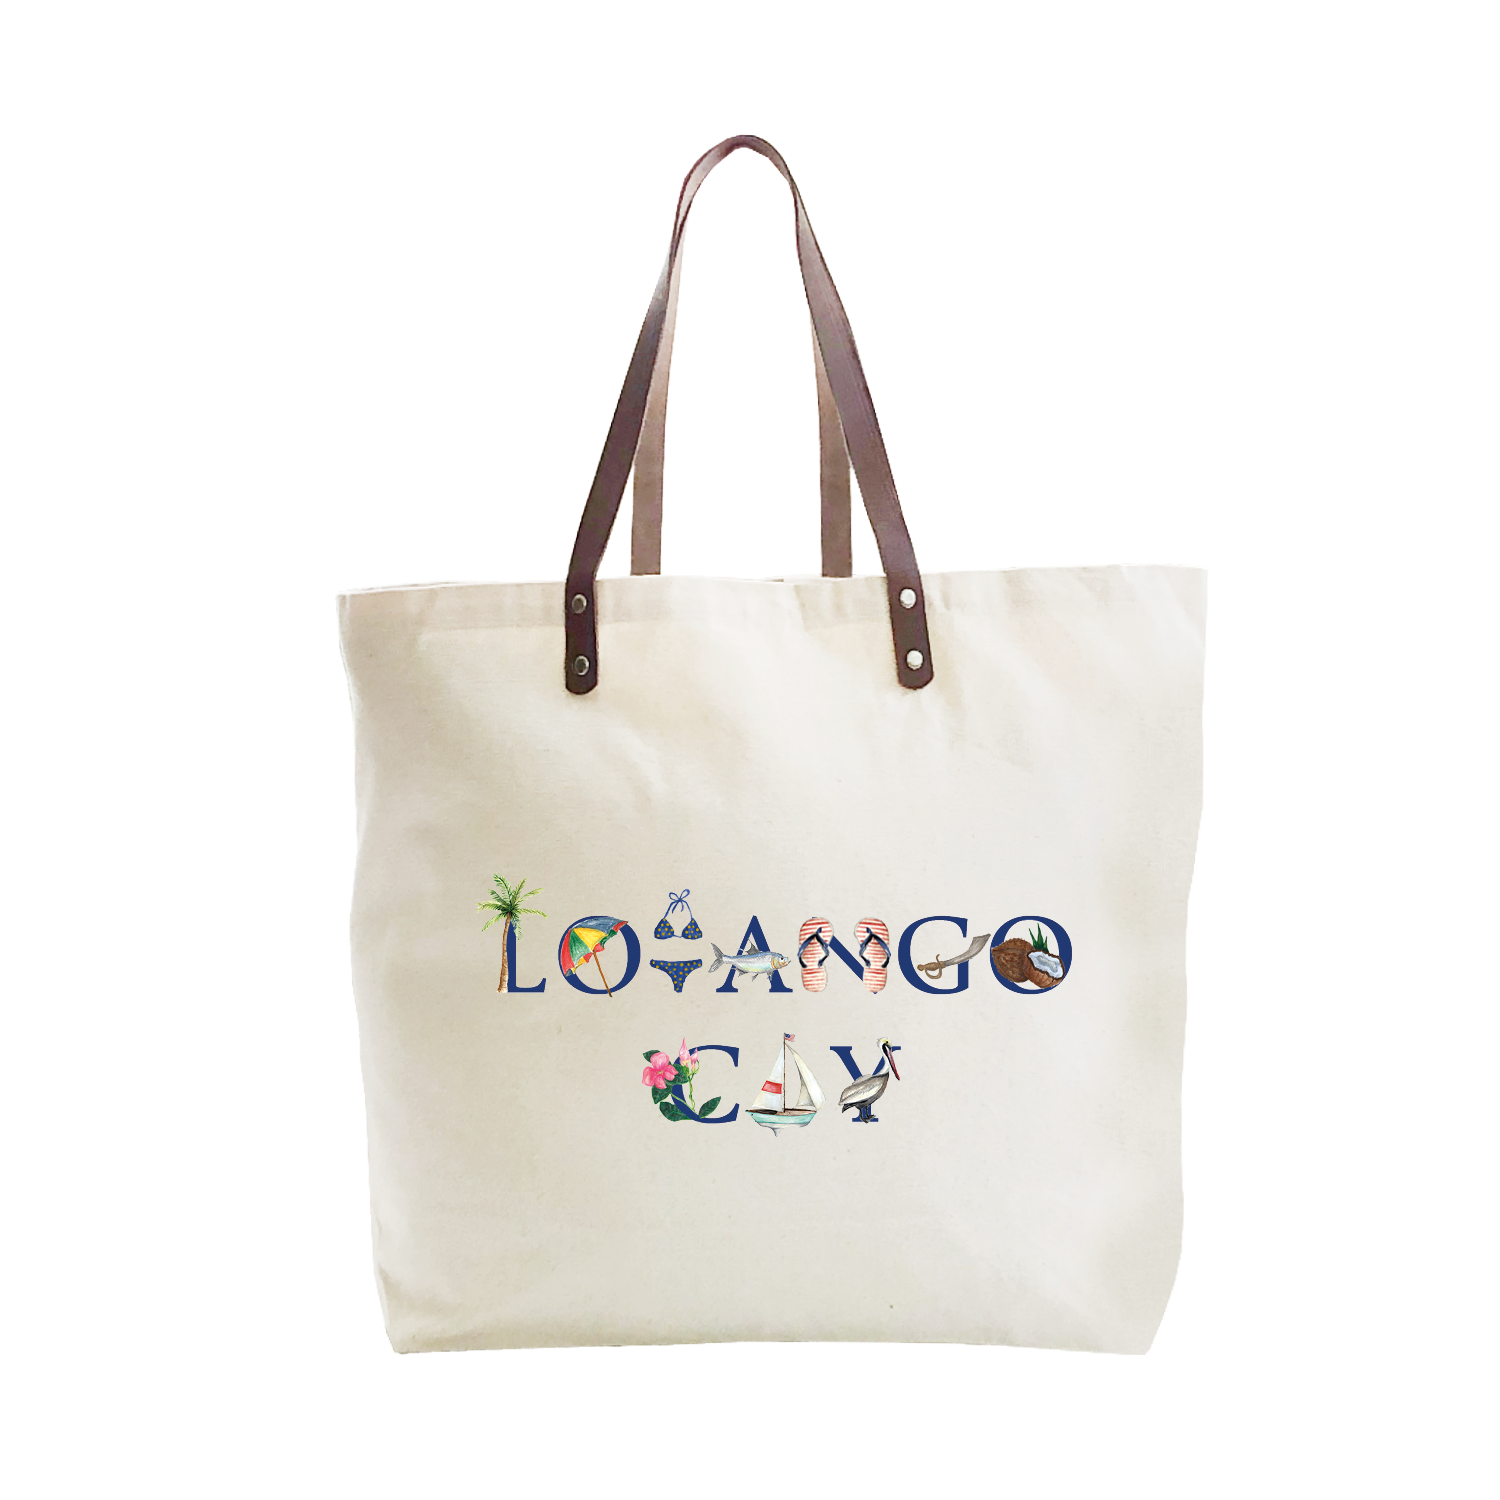 lovango cay large tote